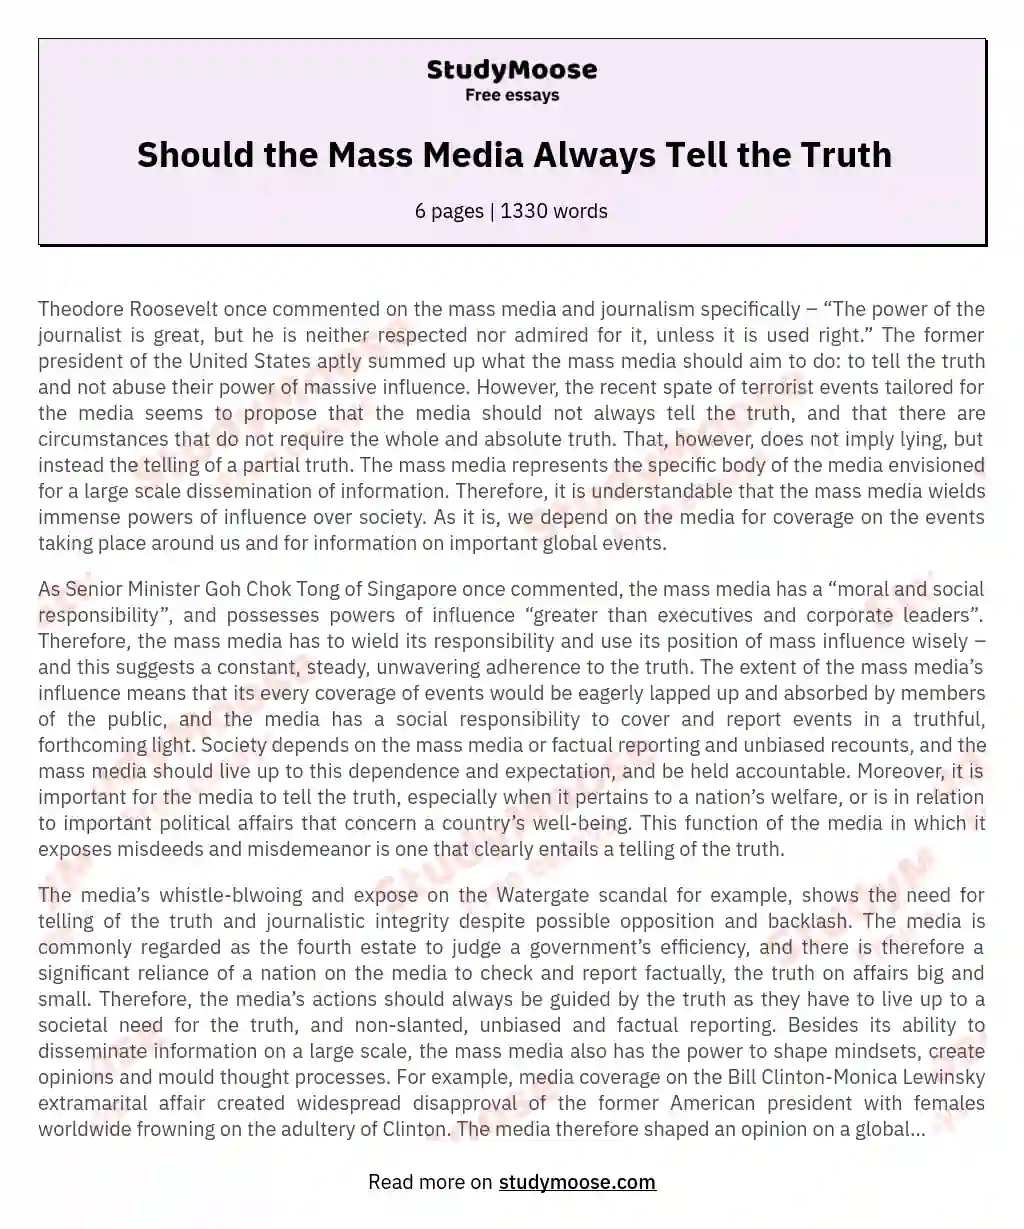 Should the Mass Media Always Tell the Truth